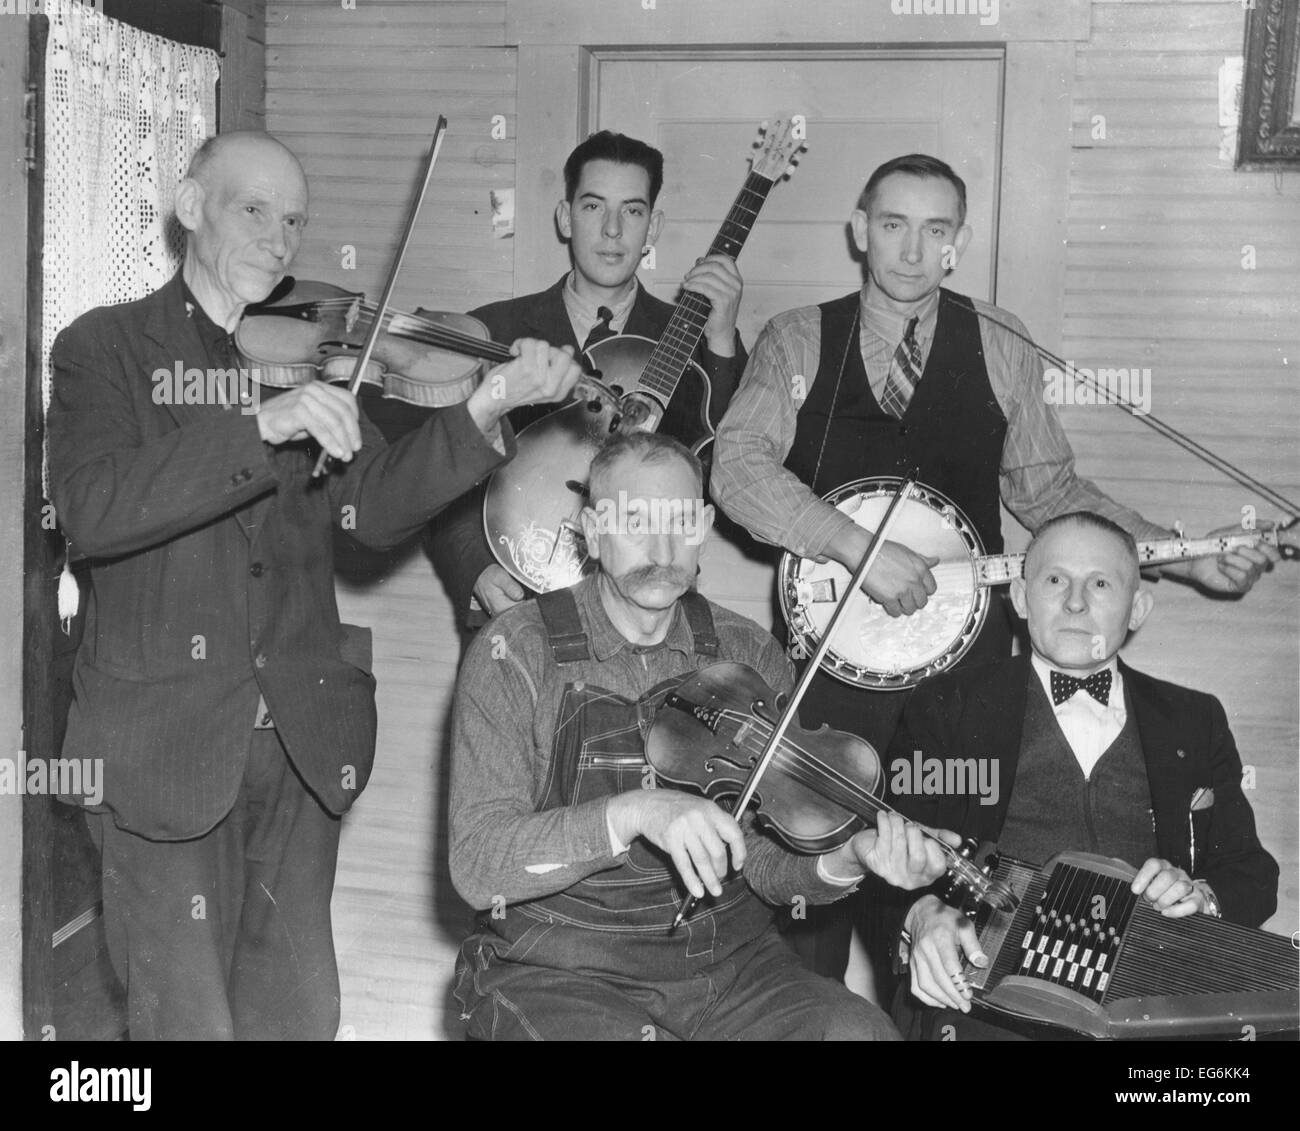 Members of the Bog Trotters Band posed holding their instruments, Galax, Va, 1937 Stock Photo